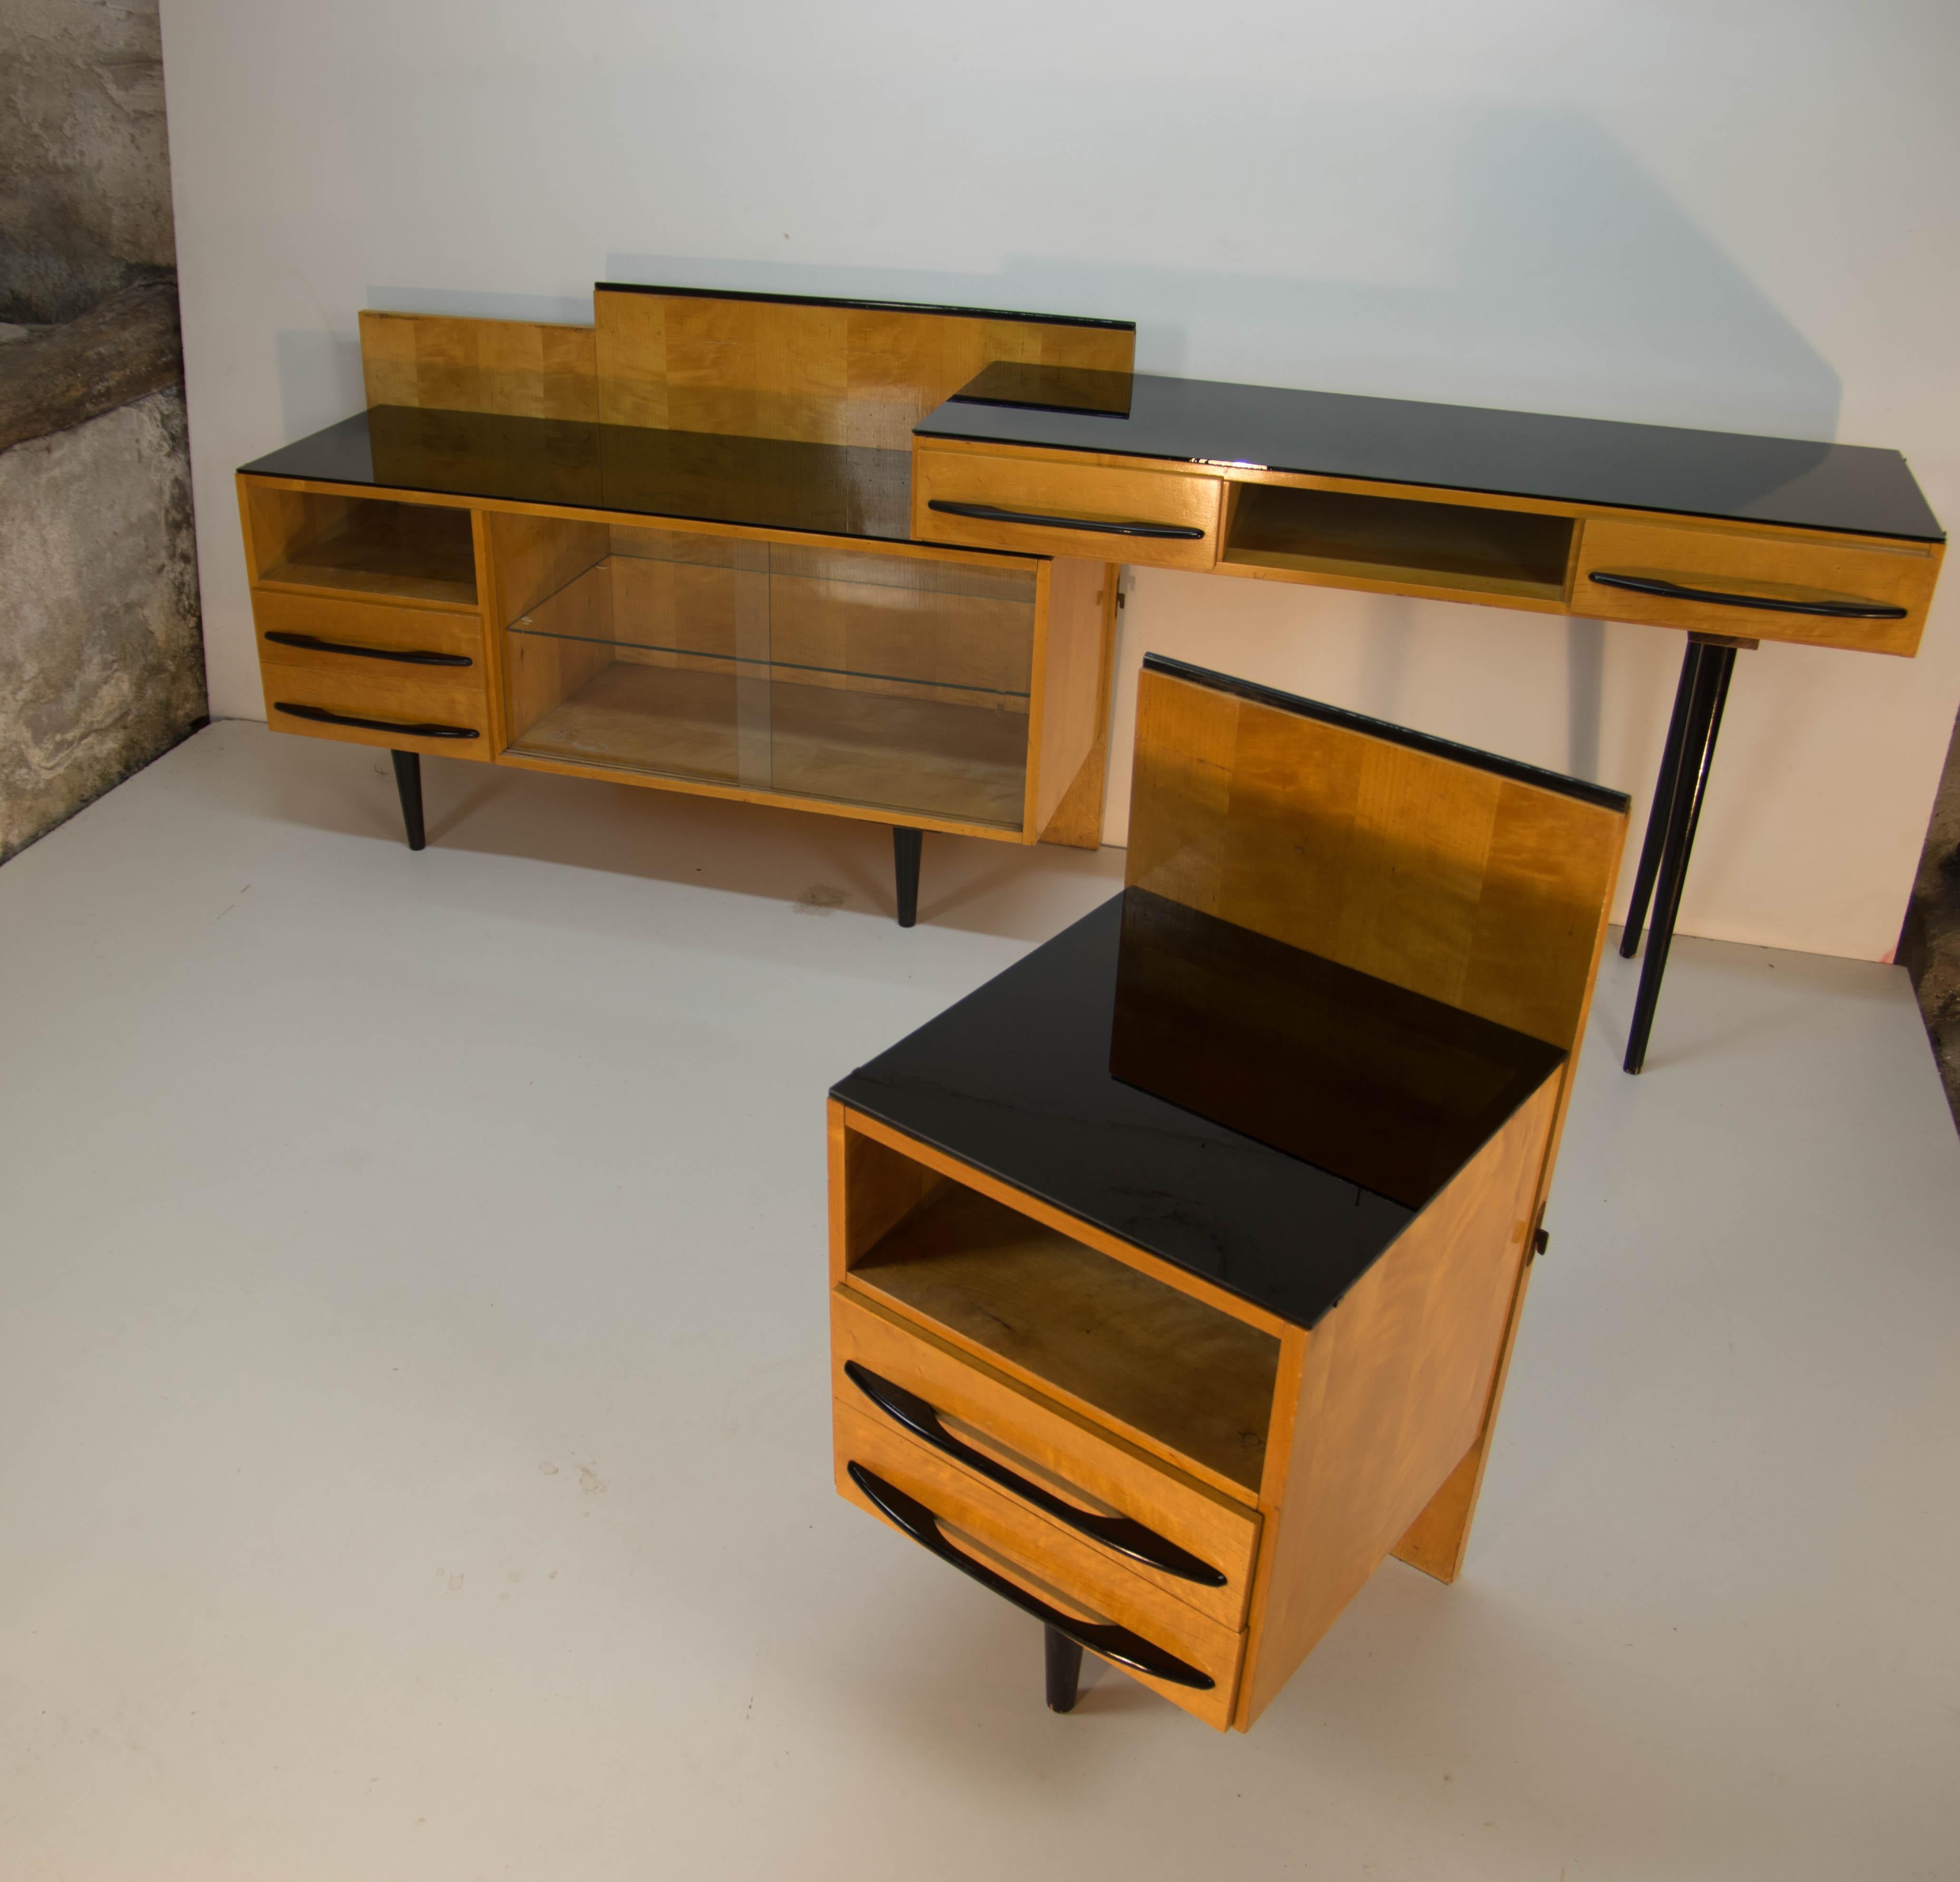 Modular Set of Table, Nightstand and Chest of Drawers by M. Pozar, 1960s For Sale 1